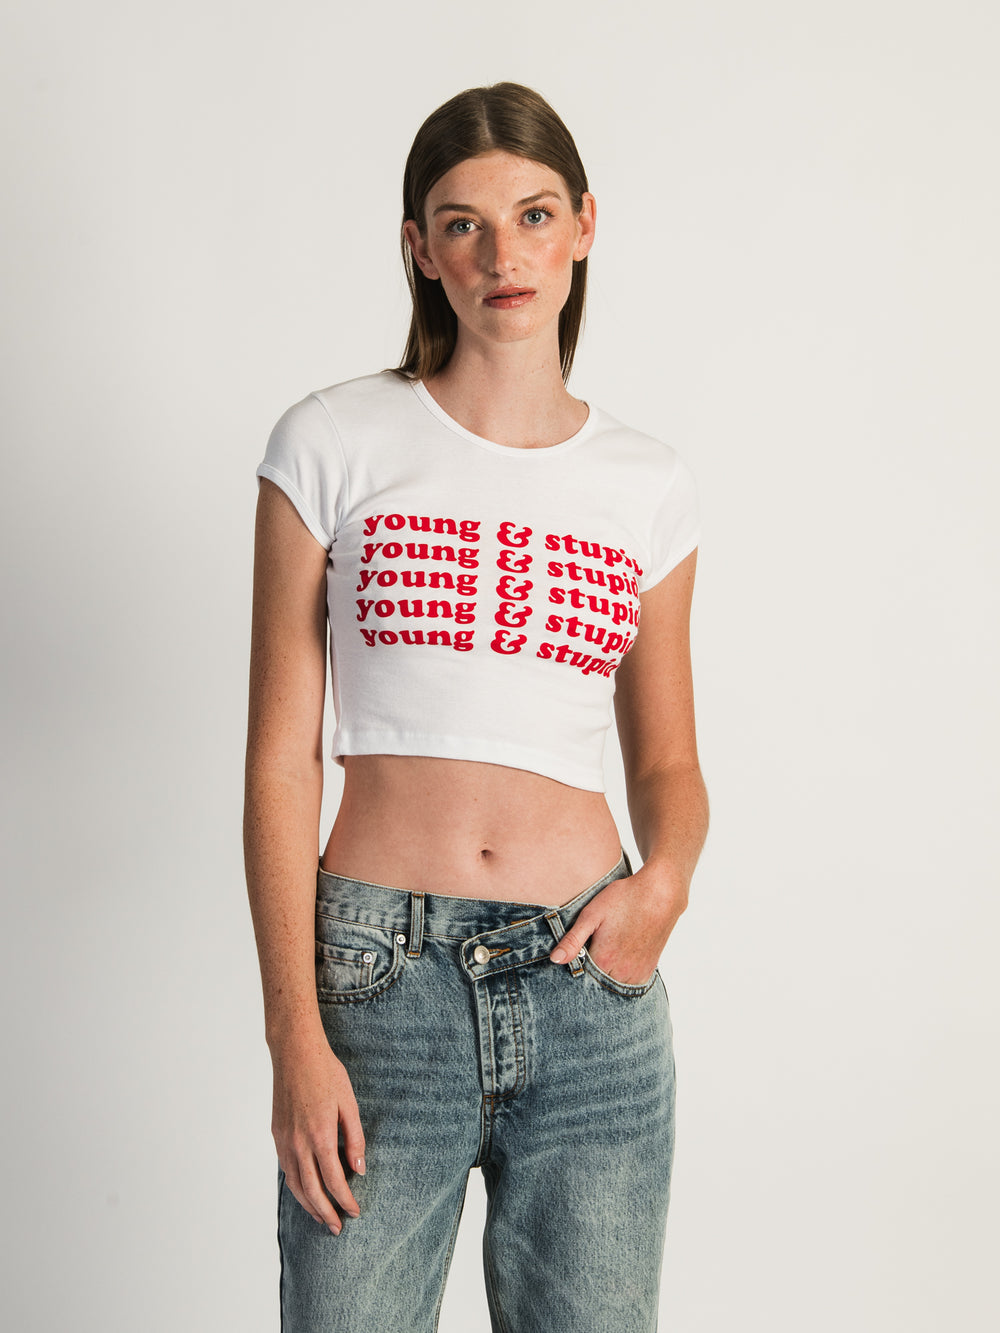 BARSTOOL SPORTS YOUNG & STUPID CROPPED T-SHIRT